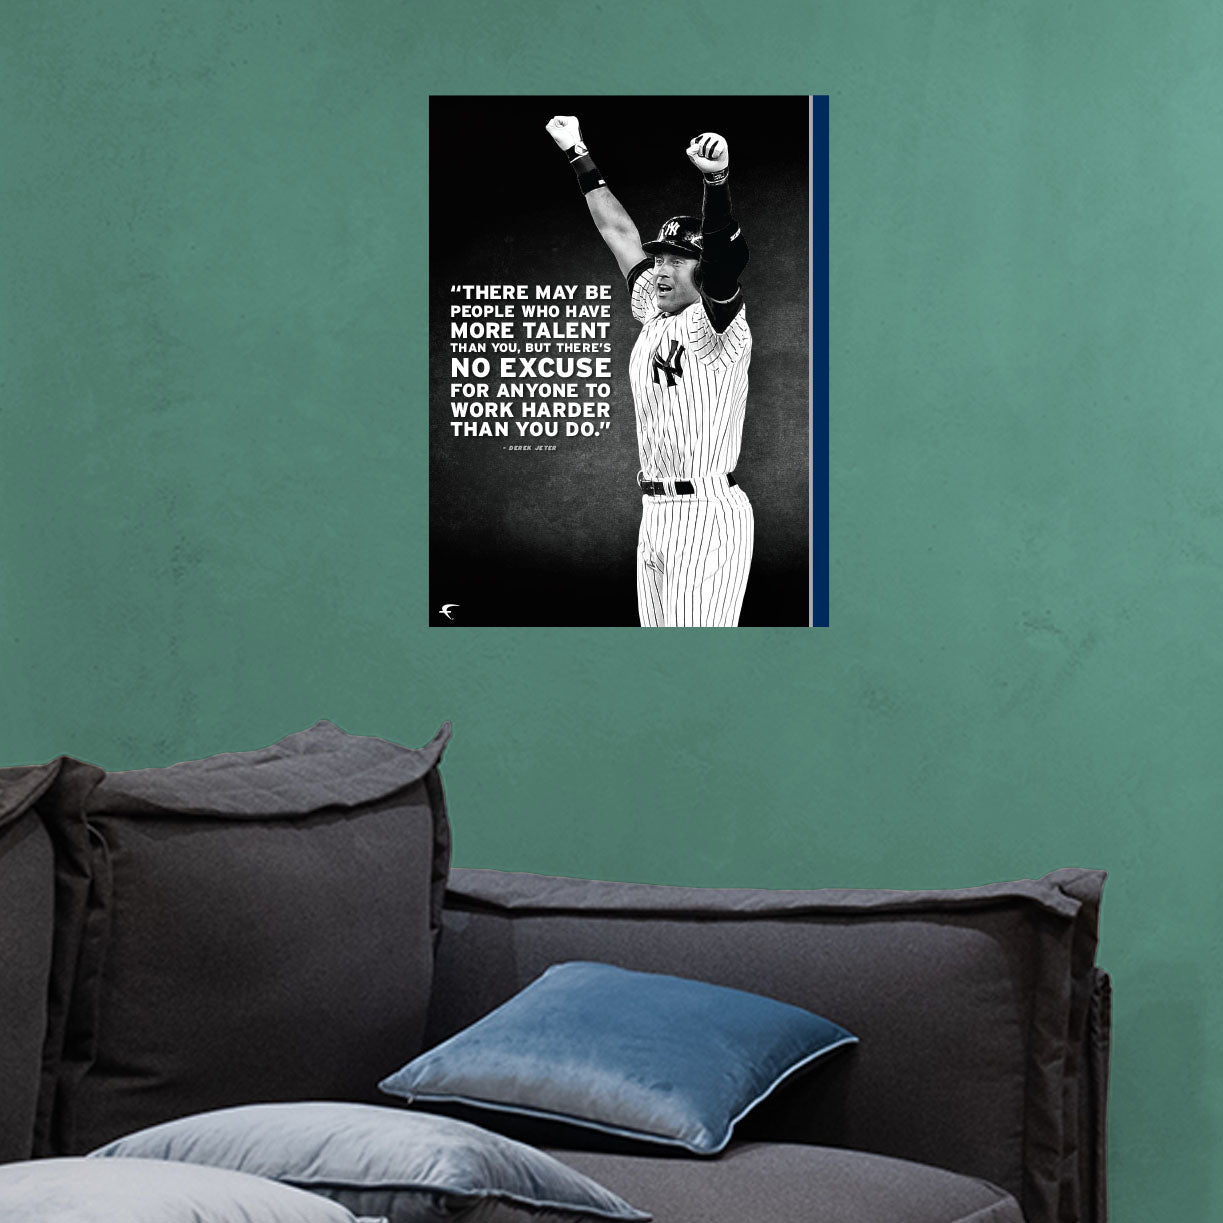 New York Yankees: Derek Jeter Inspirational Poster - Officially Licensed MLB Removable Adhesive Decal